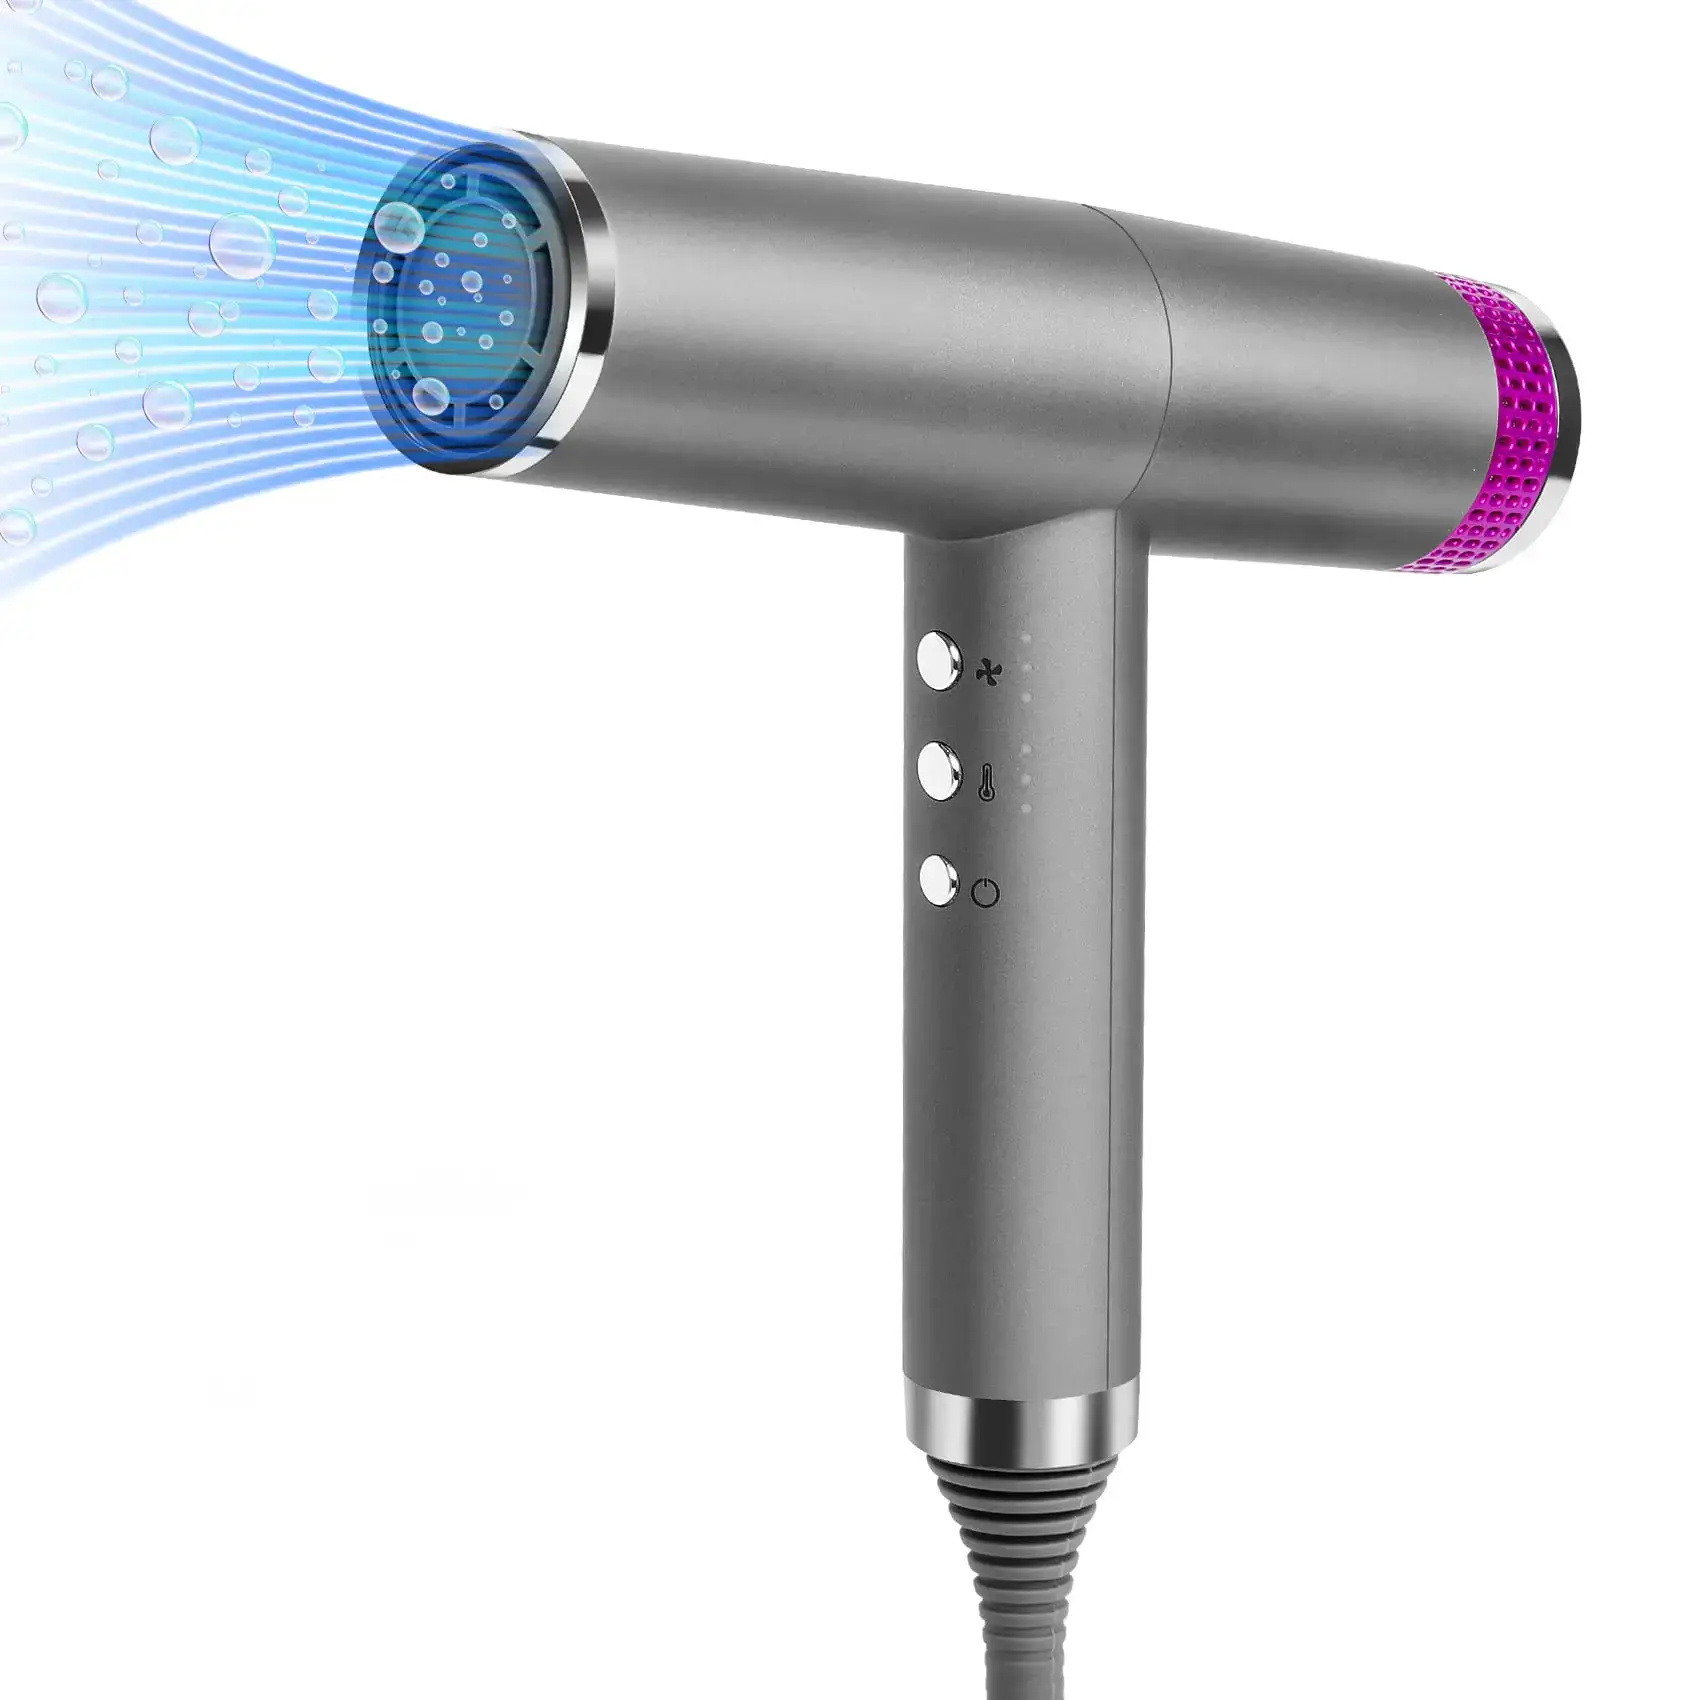 Hair dryer blowing cold air with visible airflow ionics illustration.